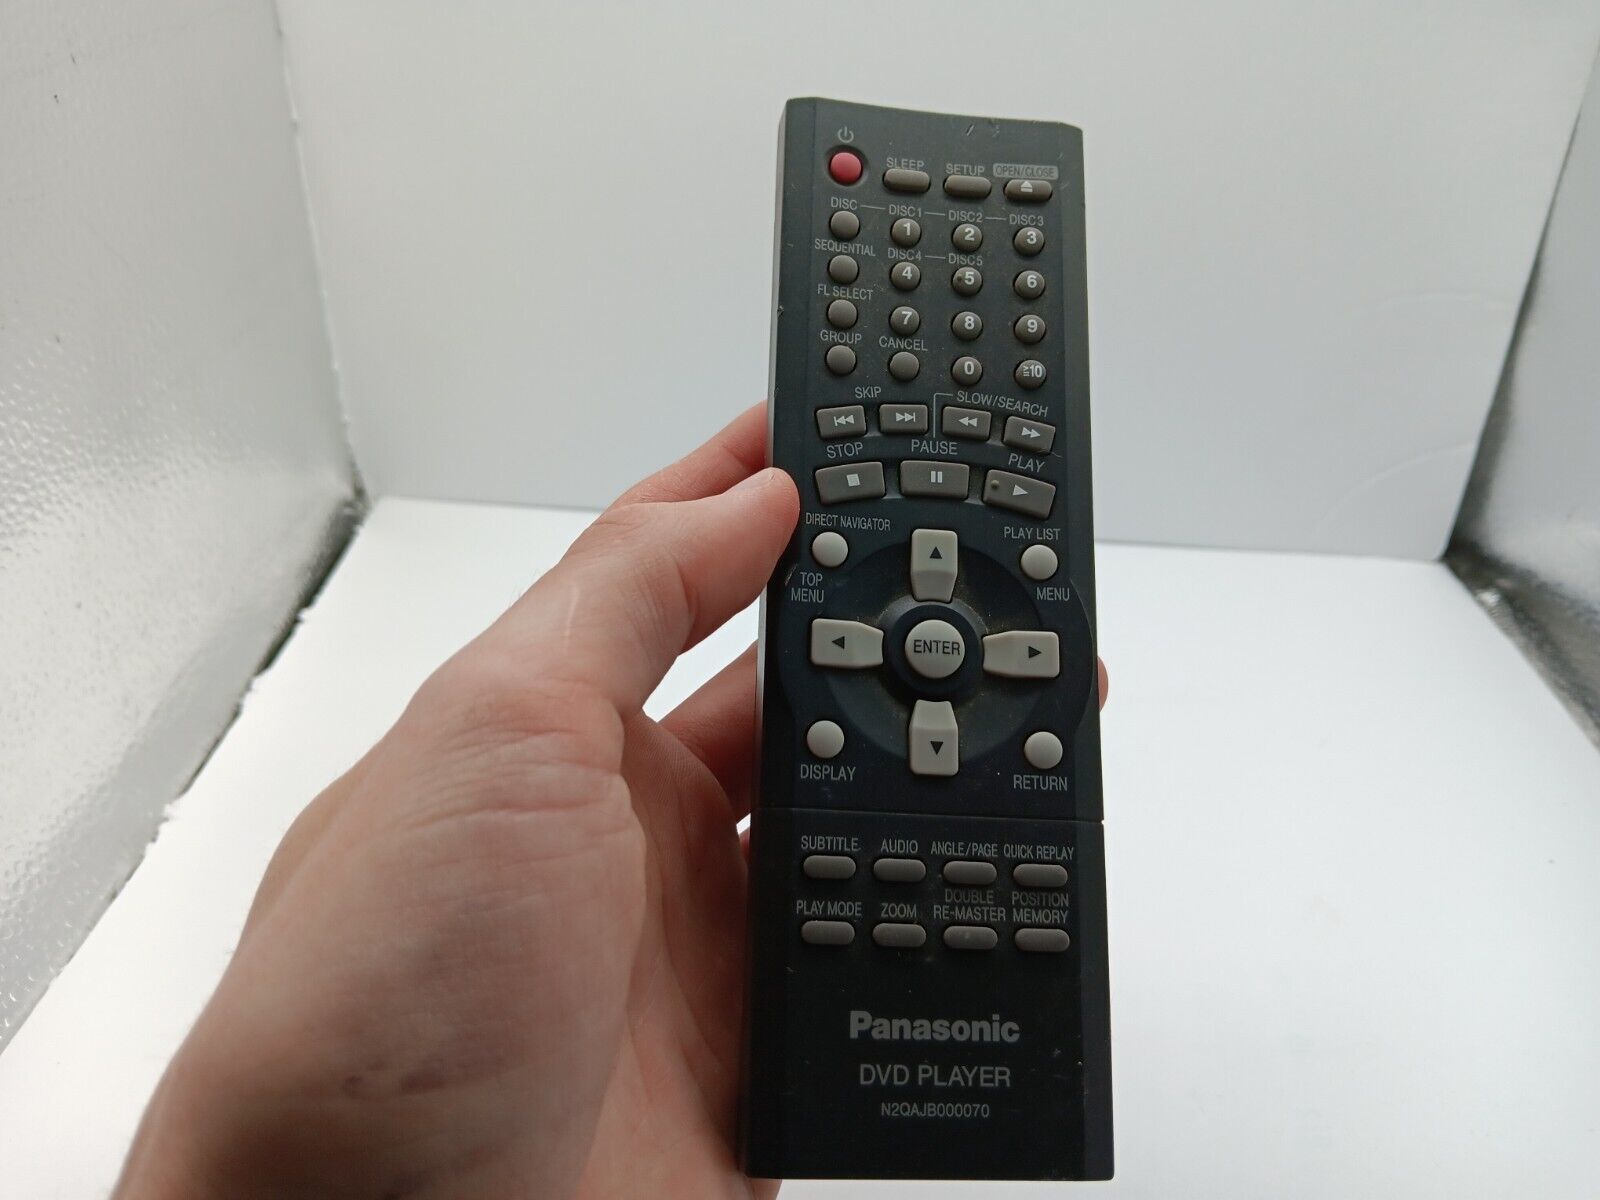 Primary image for Panaosnic DVD remote N2QAJB000070